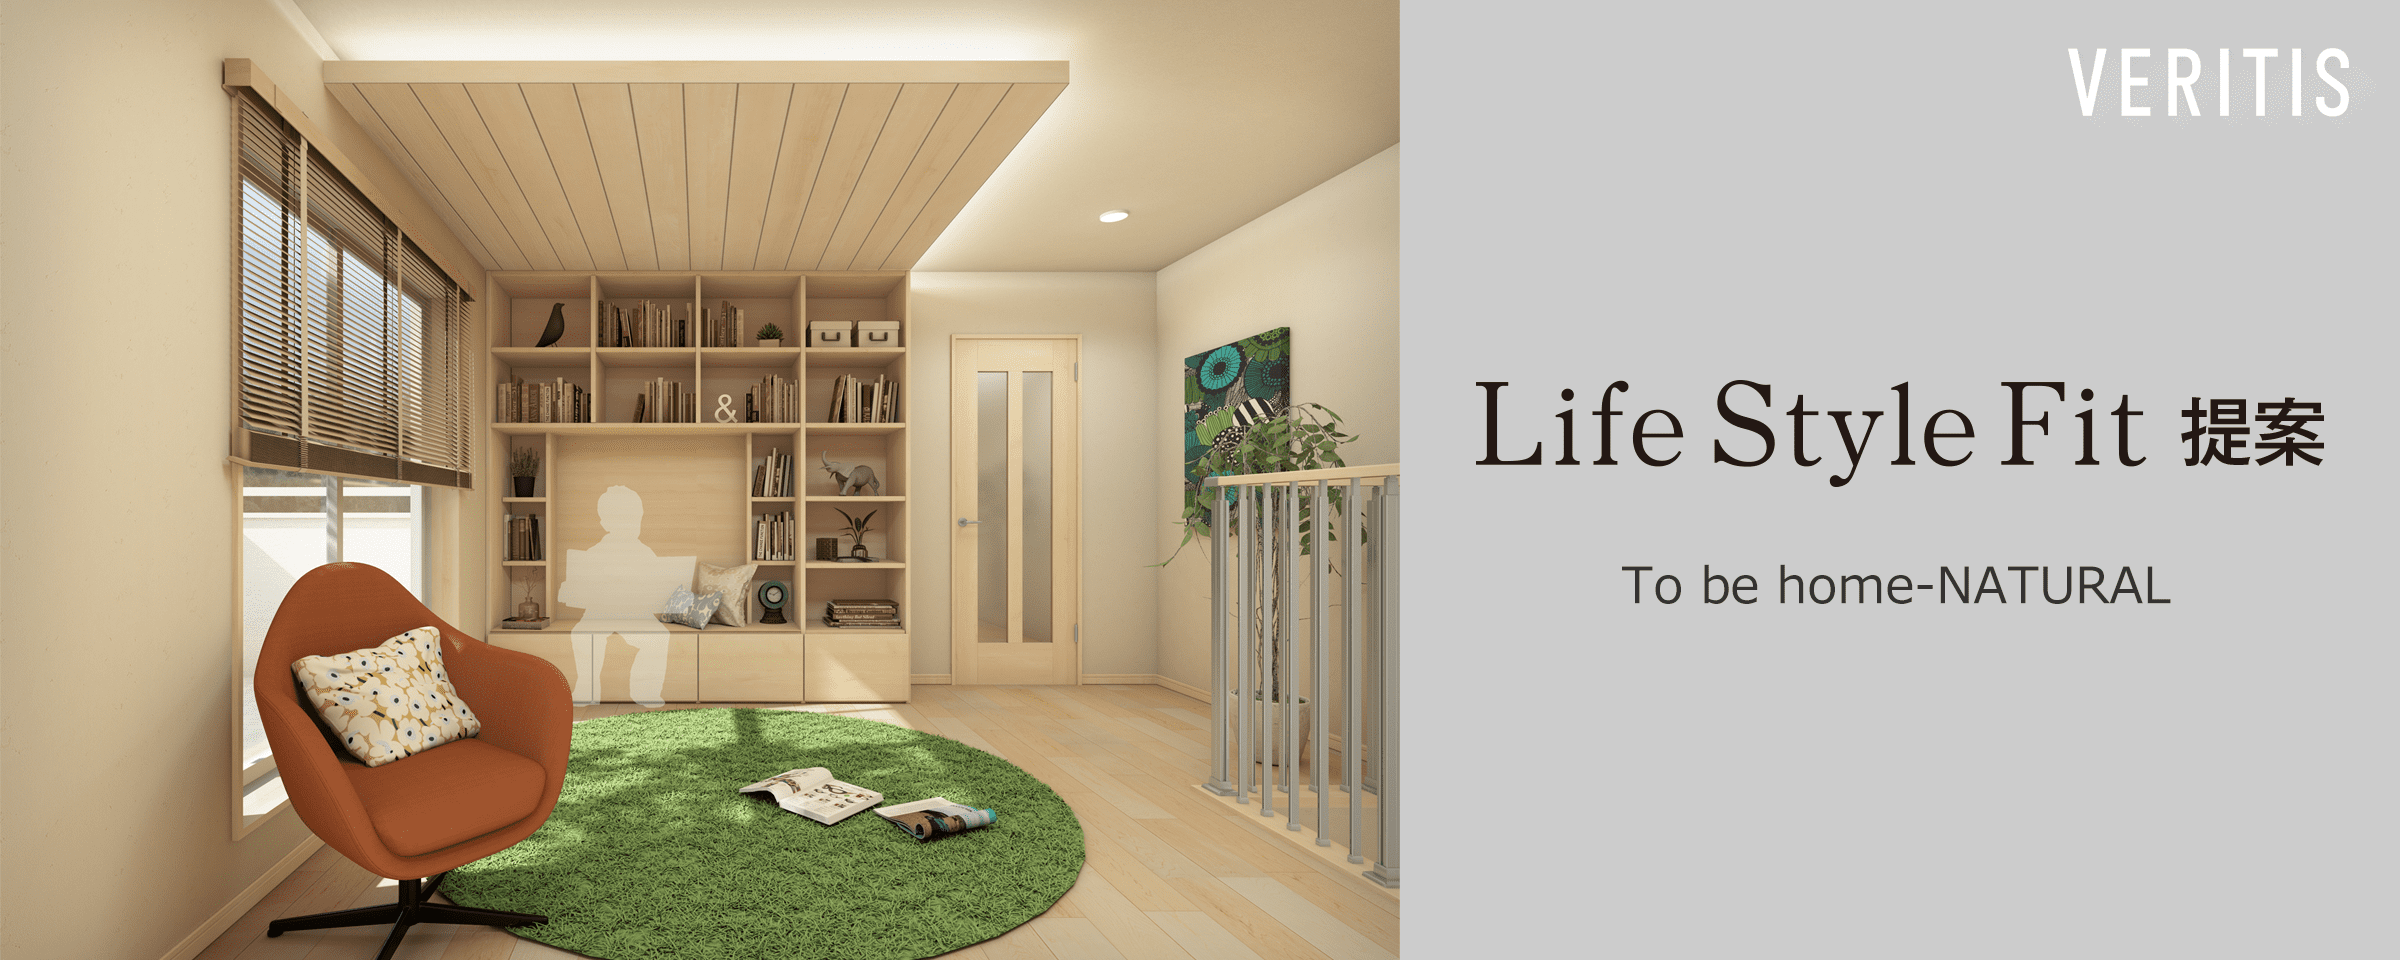 Life style Fit 提案 To be home-NATURAL